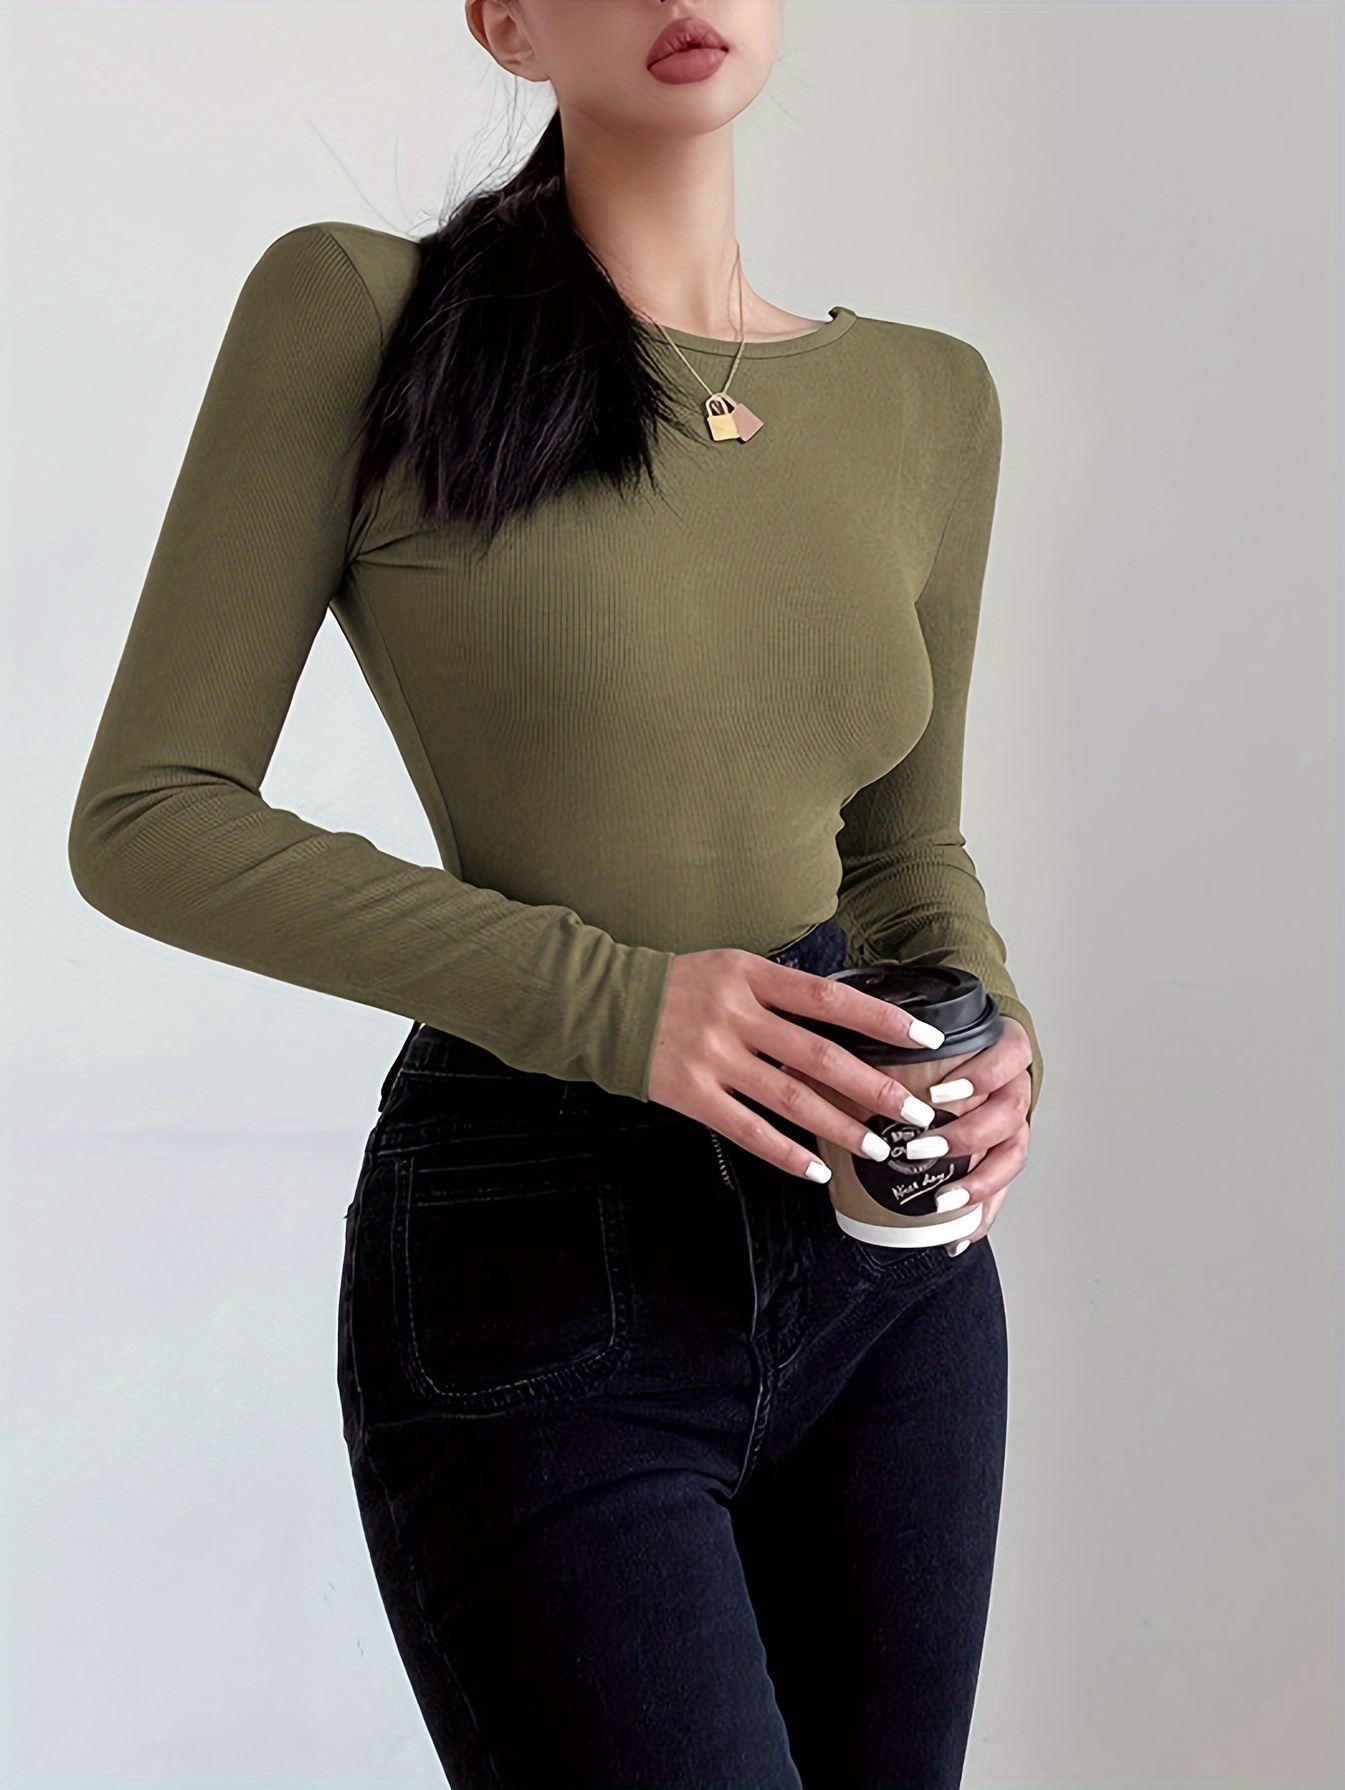  Square Neck Long Sleeve Top Long Sleeve Athletic Tops for Women  Solid Sexy Tops for Women Plus Size Ladies Sweatshirts Casual Work Clothes  for Women Plus Size Halloween Costumes Army Green 